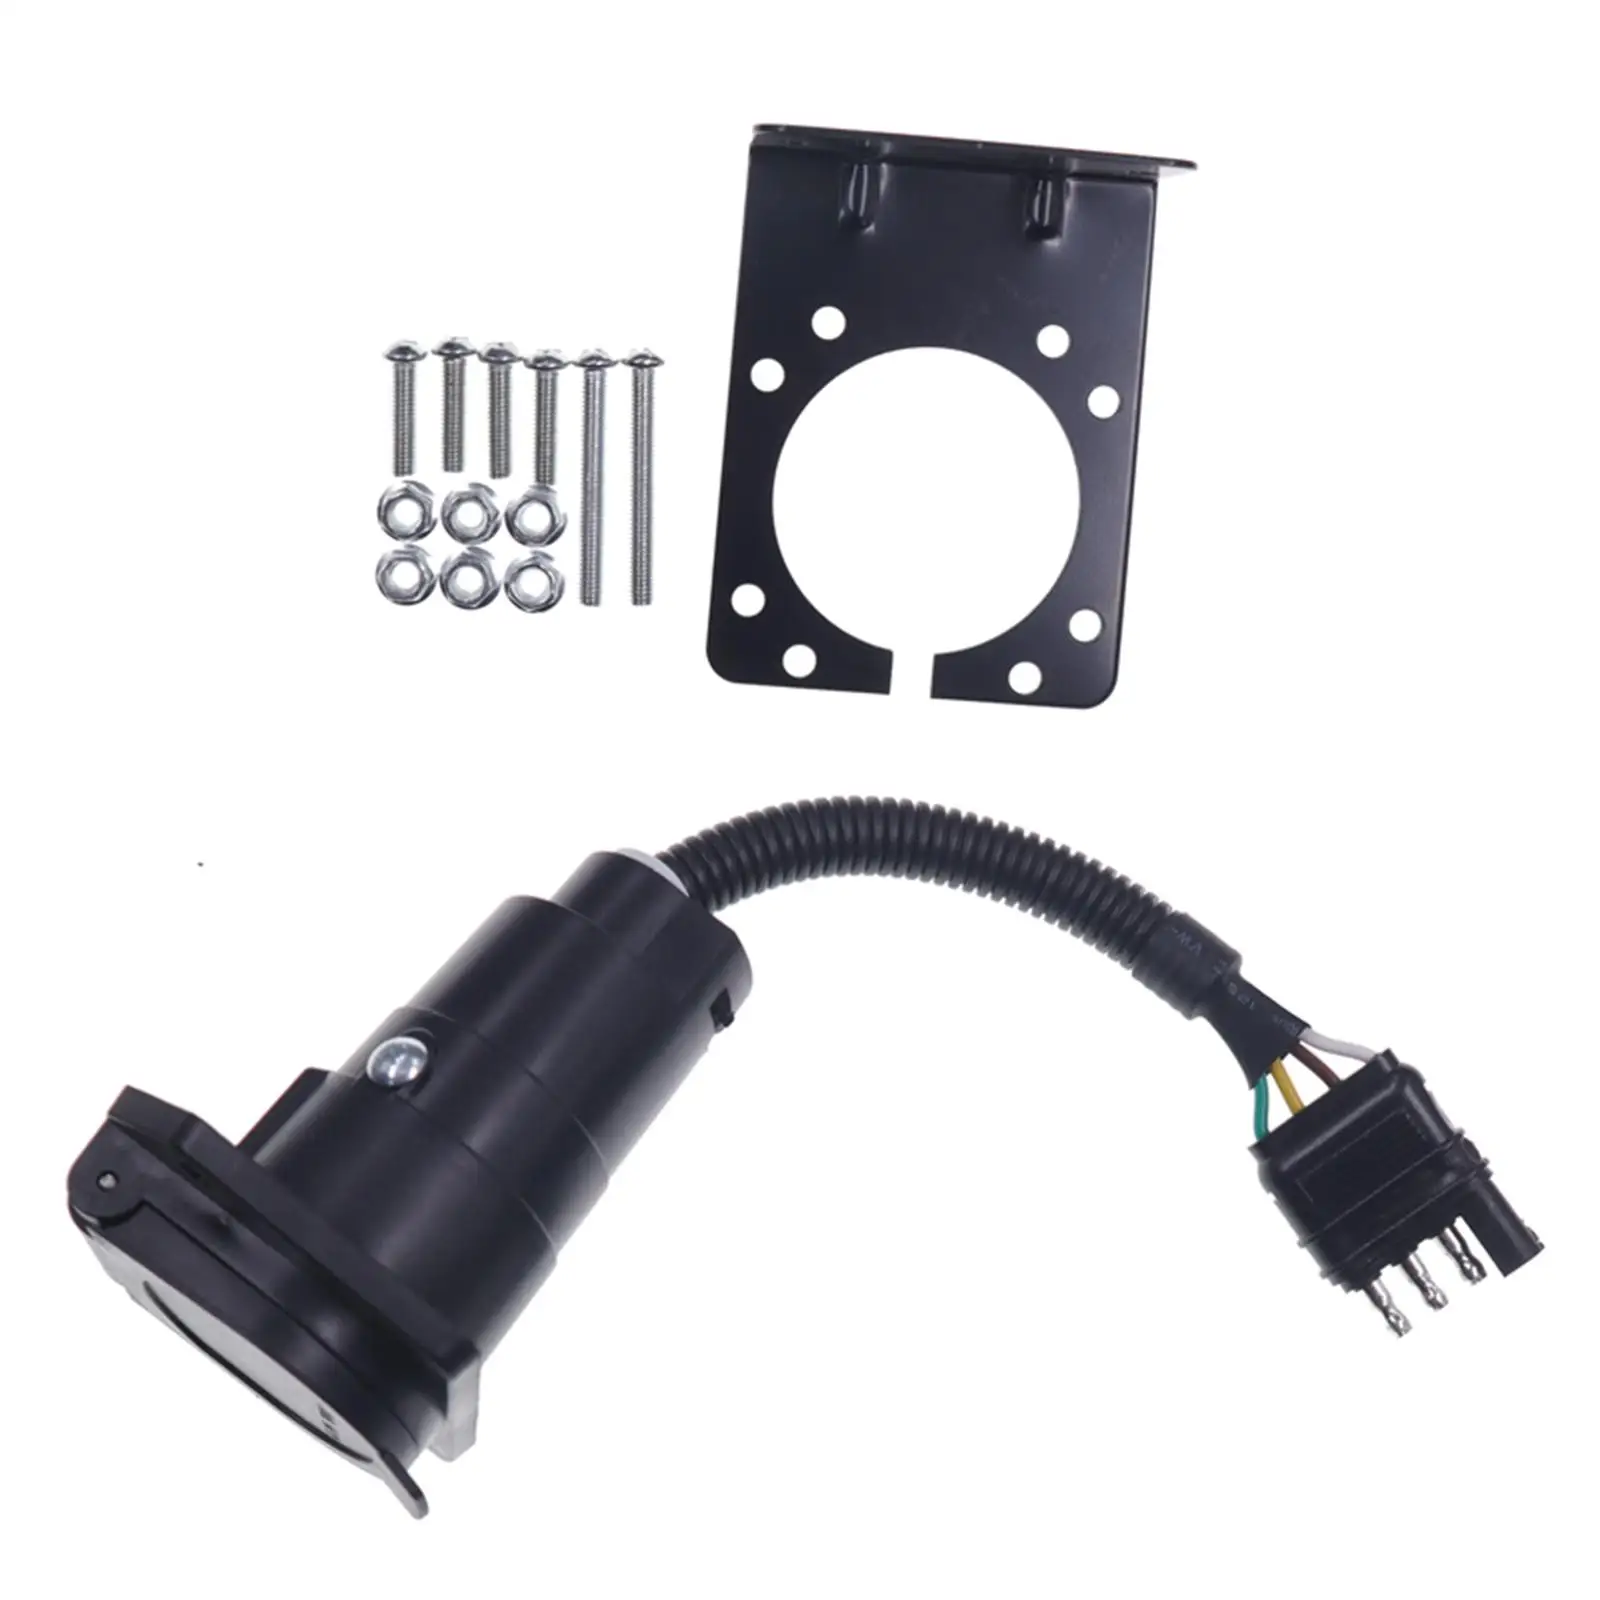 Trailer Adapter Plug 4 Pin to 7 Pin with Mounting Bracket for Vehicles